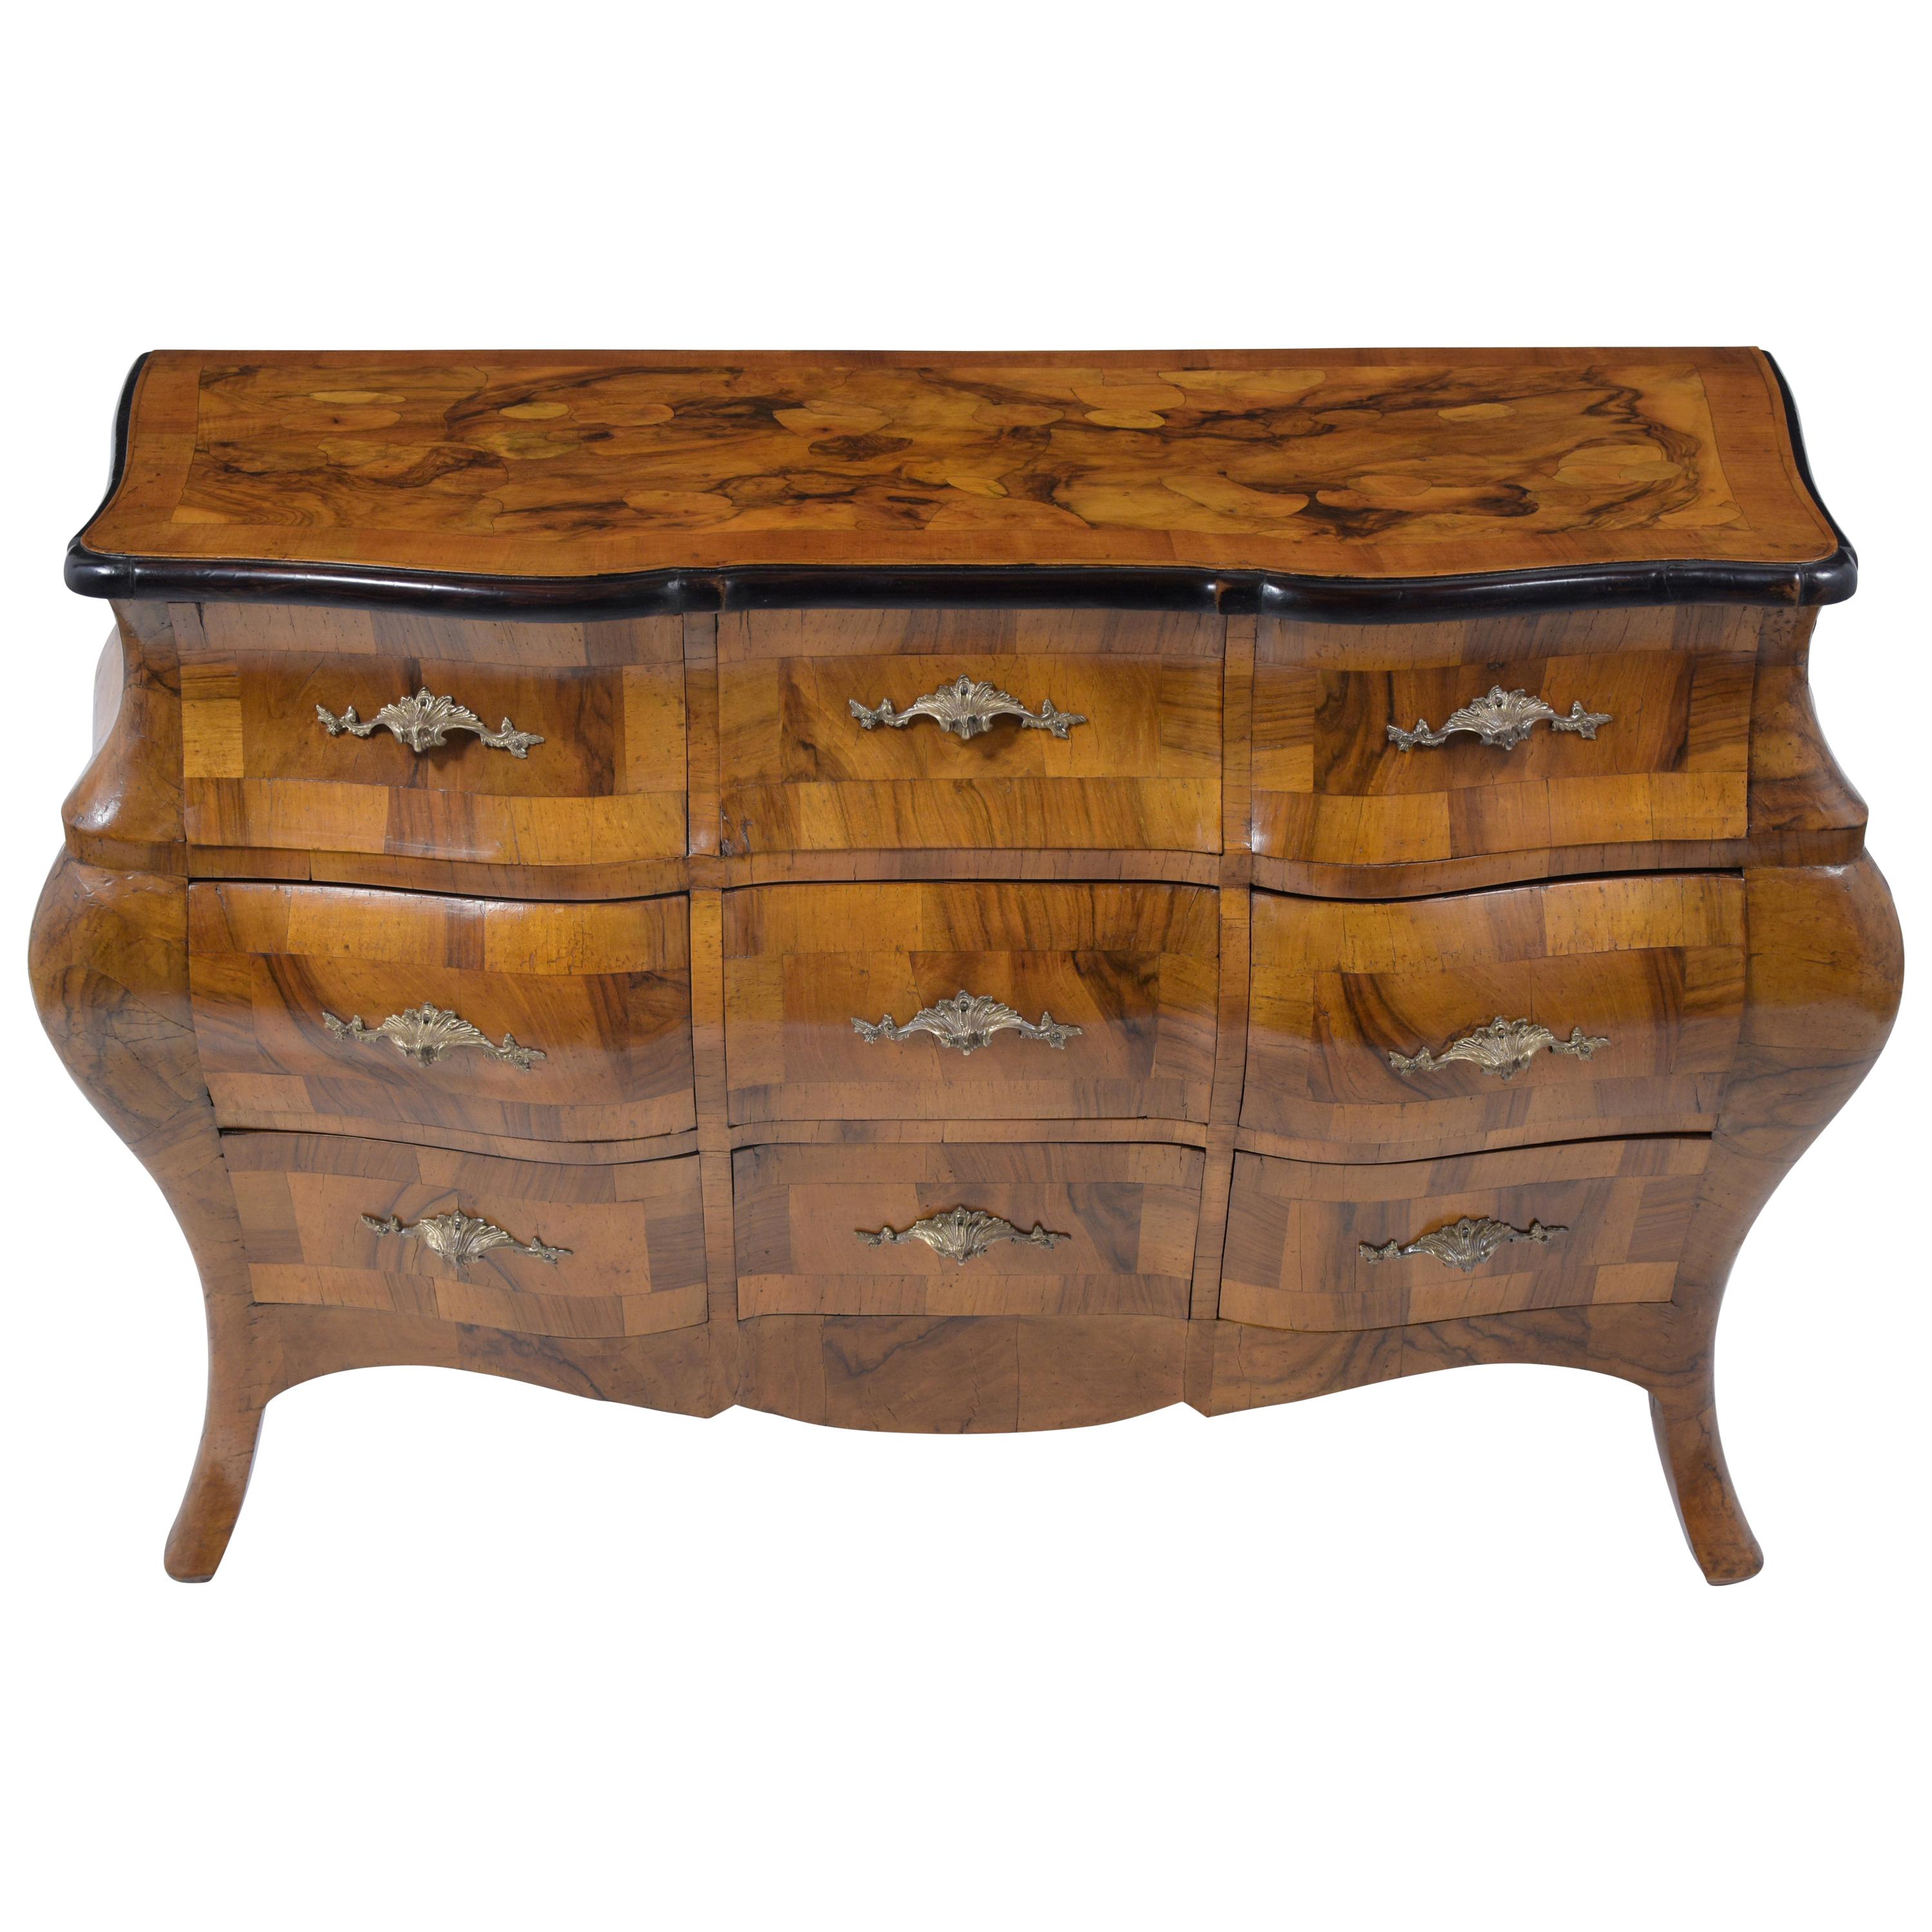 A remarkable early 1900s Italian chest of drawers crafted from solid maple wood covered with burl walnut veneers, a newly waxed patina finish, and has been fully restored by our team of craftsmen. This eye-catching dresser has been professionally